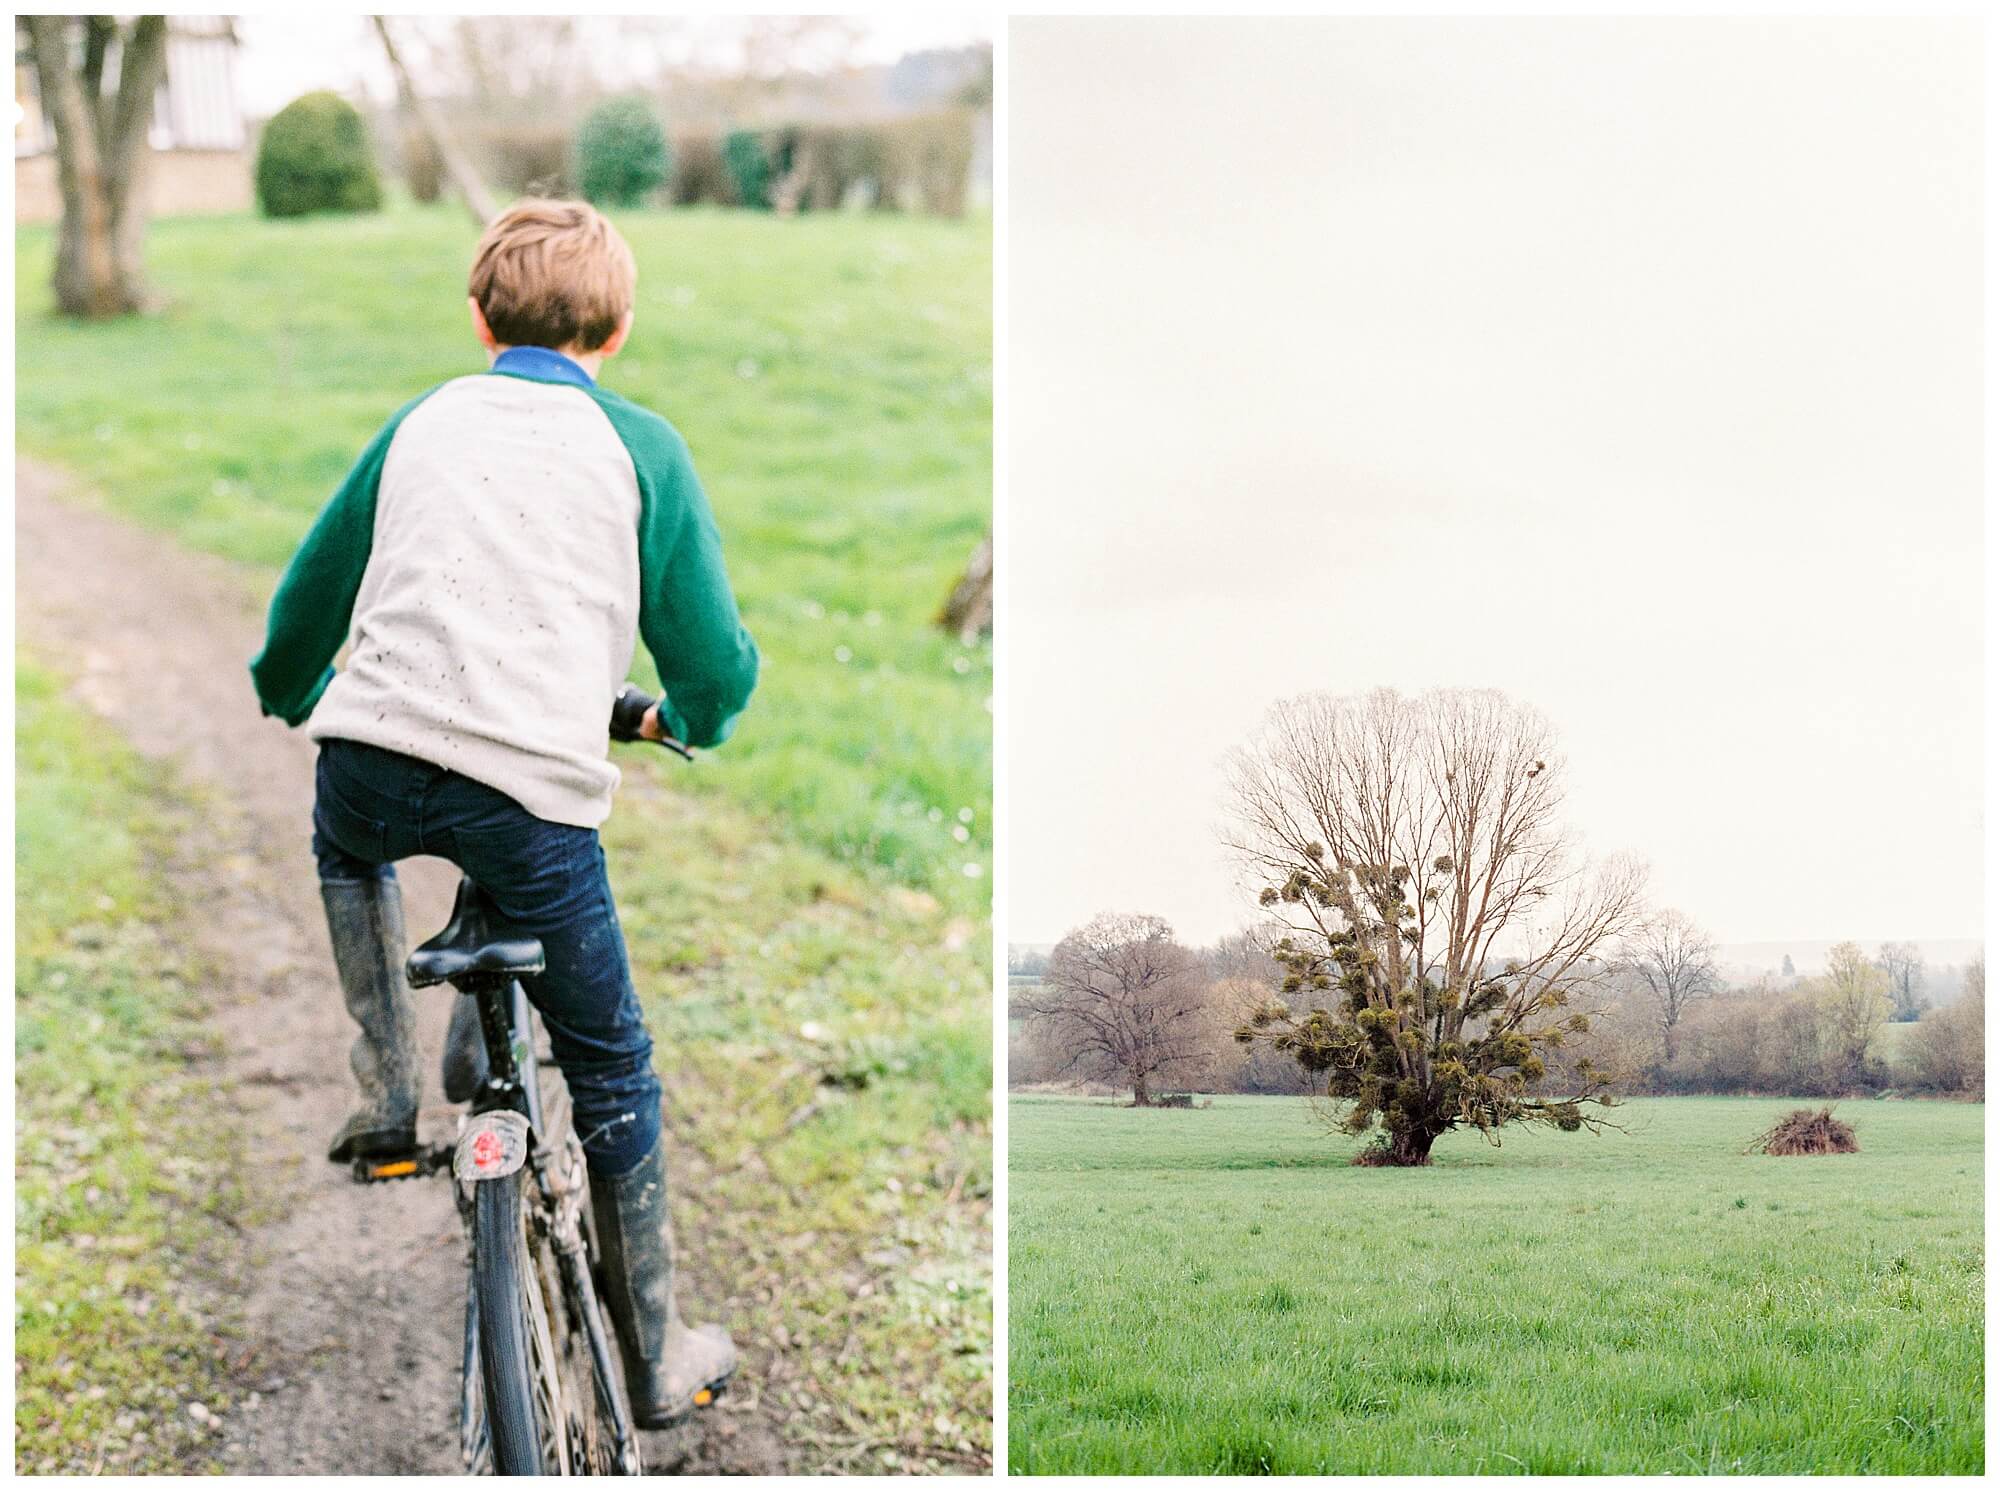 Left: A young French boy rides his bicycle down a dirt road in the countryside during the COVID 19 quarantine in France. Right: A bare willow tree stands overrun by mistletoe in a lush green field in the French countryside.